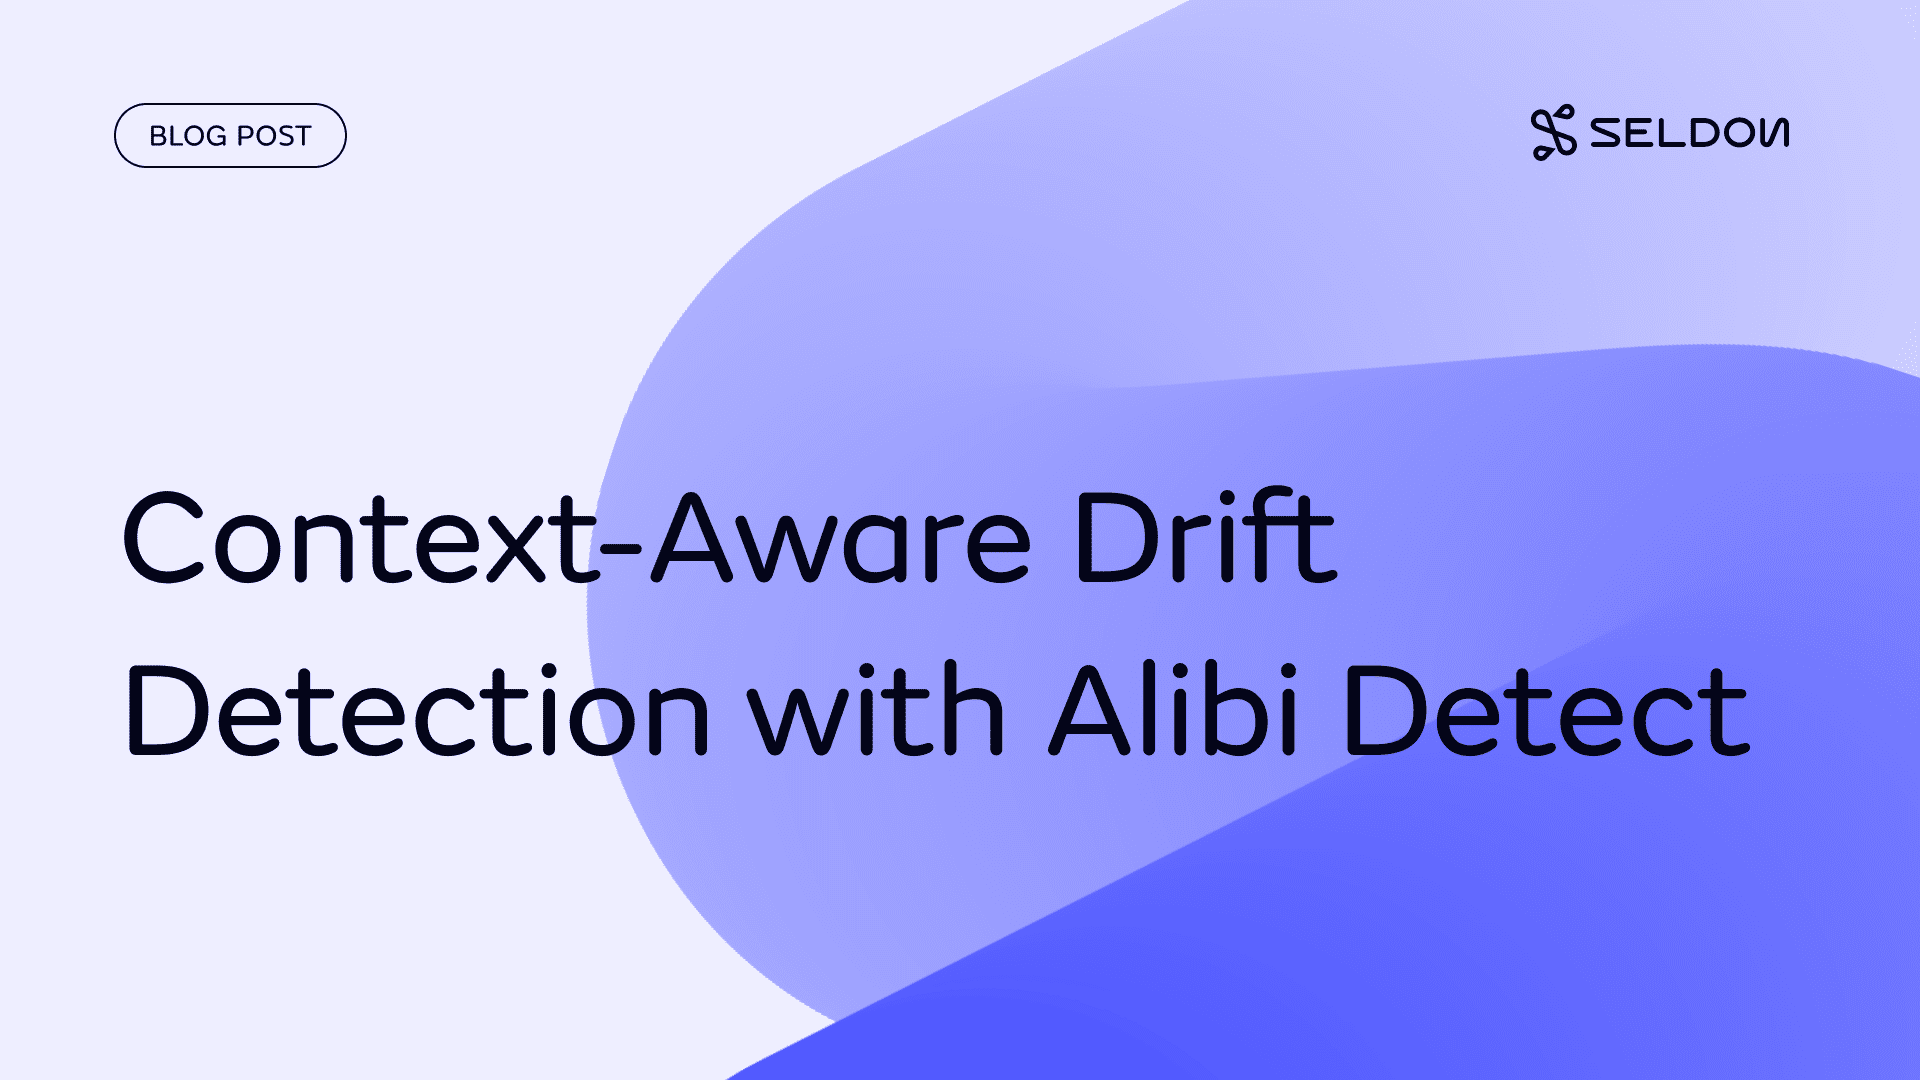 Context-Aware Drift Detection with Alibi Detect